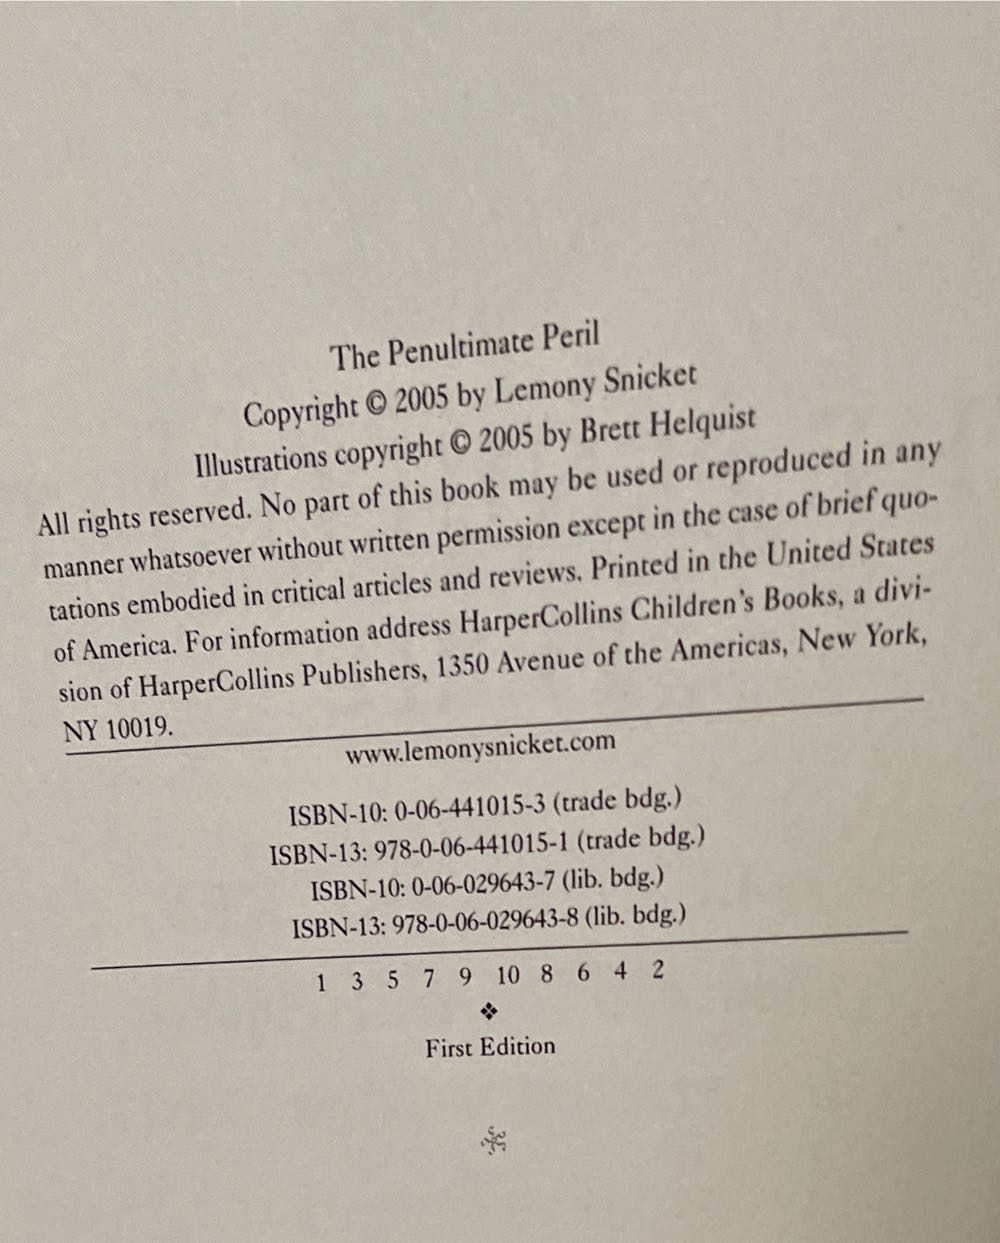 A Series Of Unfortunate Events: The Penultimate Peril - Lemony Snicket (HarperCollins - Paperback) book collectible [Barcode 9780064410151] - Main Image 3